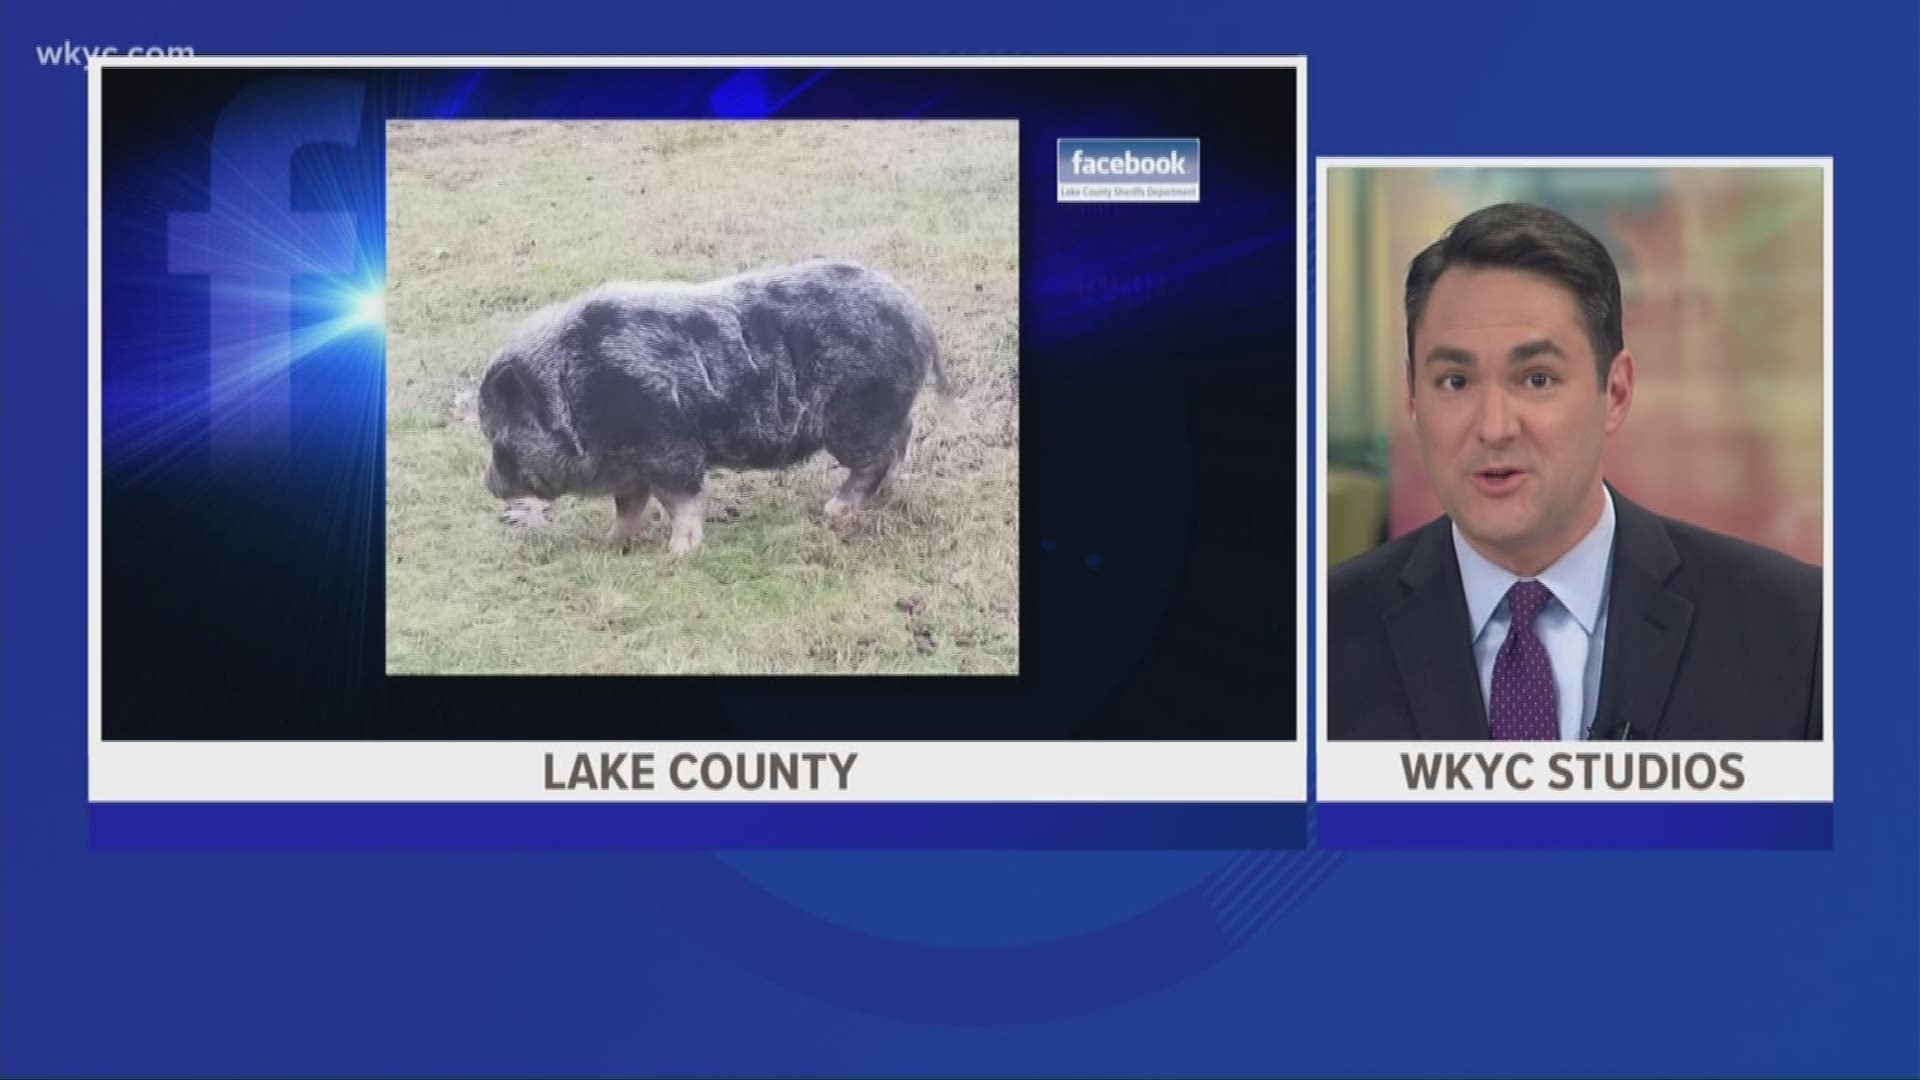 Officials searching for owners of lost pig